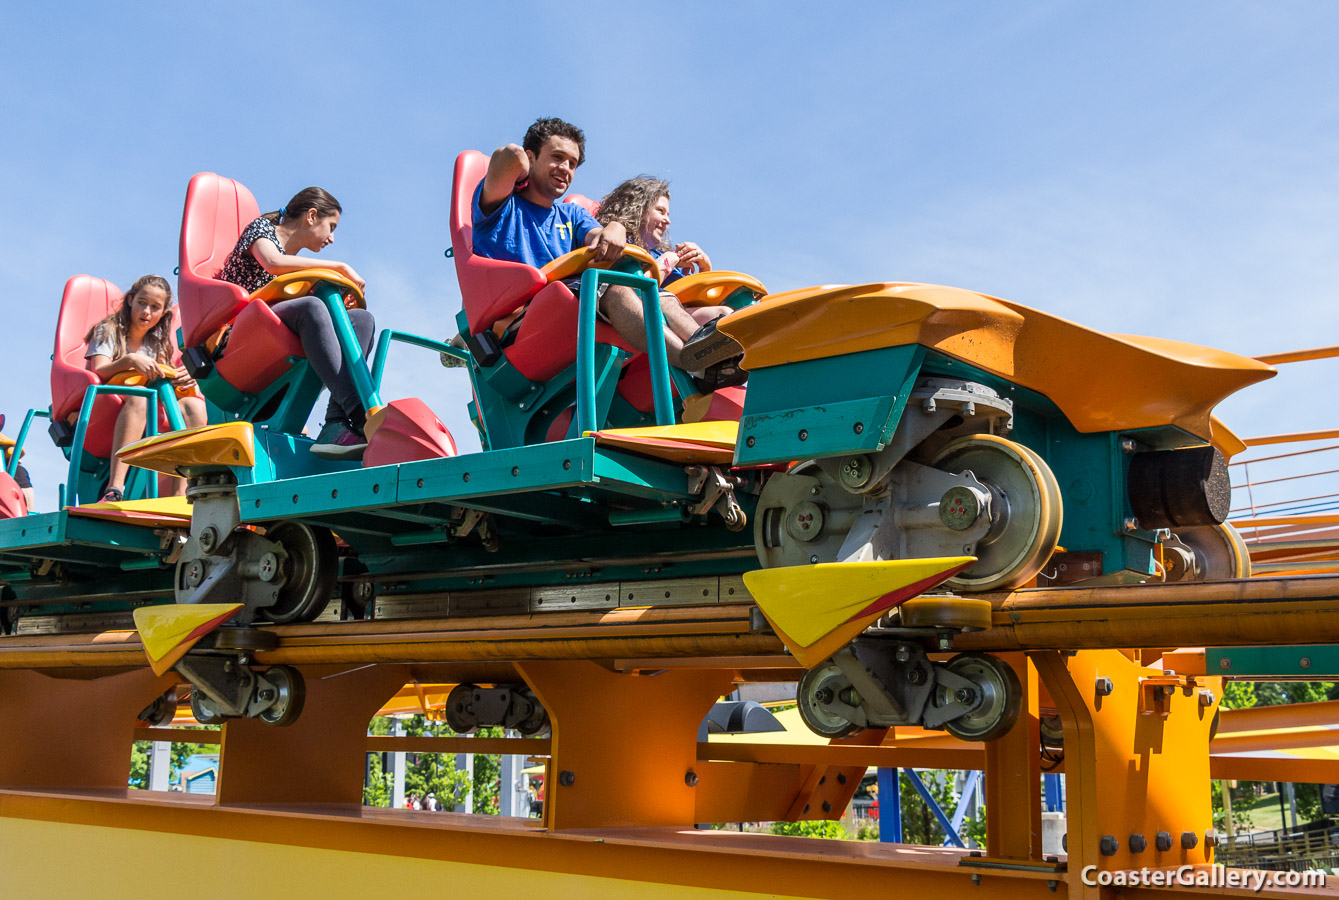 A close-up picture of the train on the Behemoth roller coaster at Canada's Wonderland